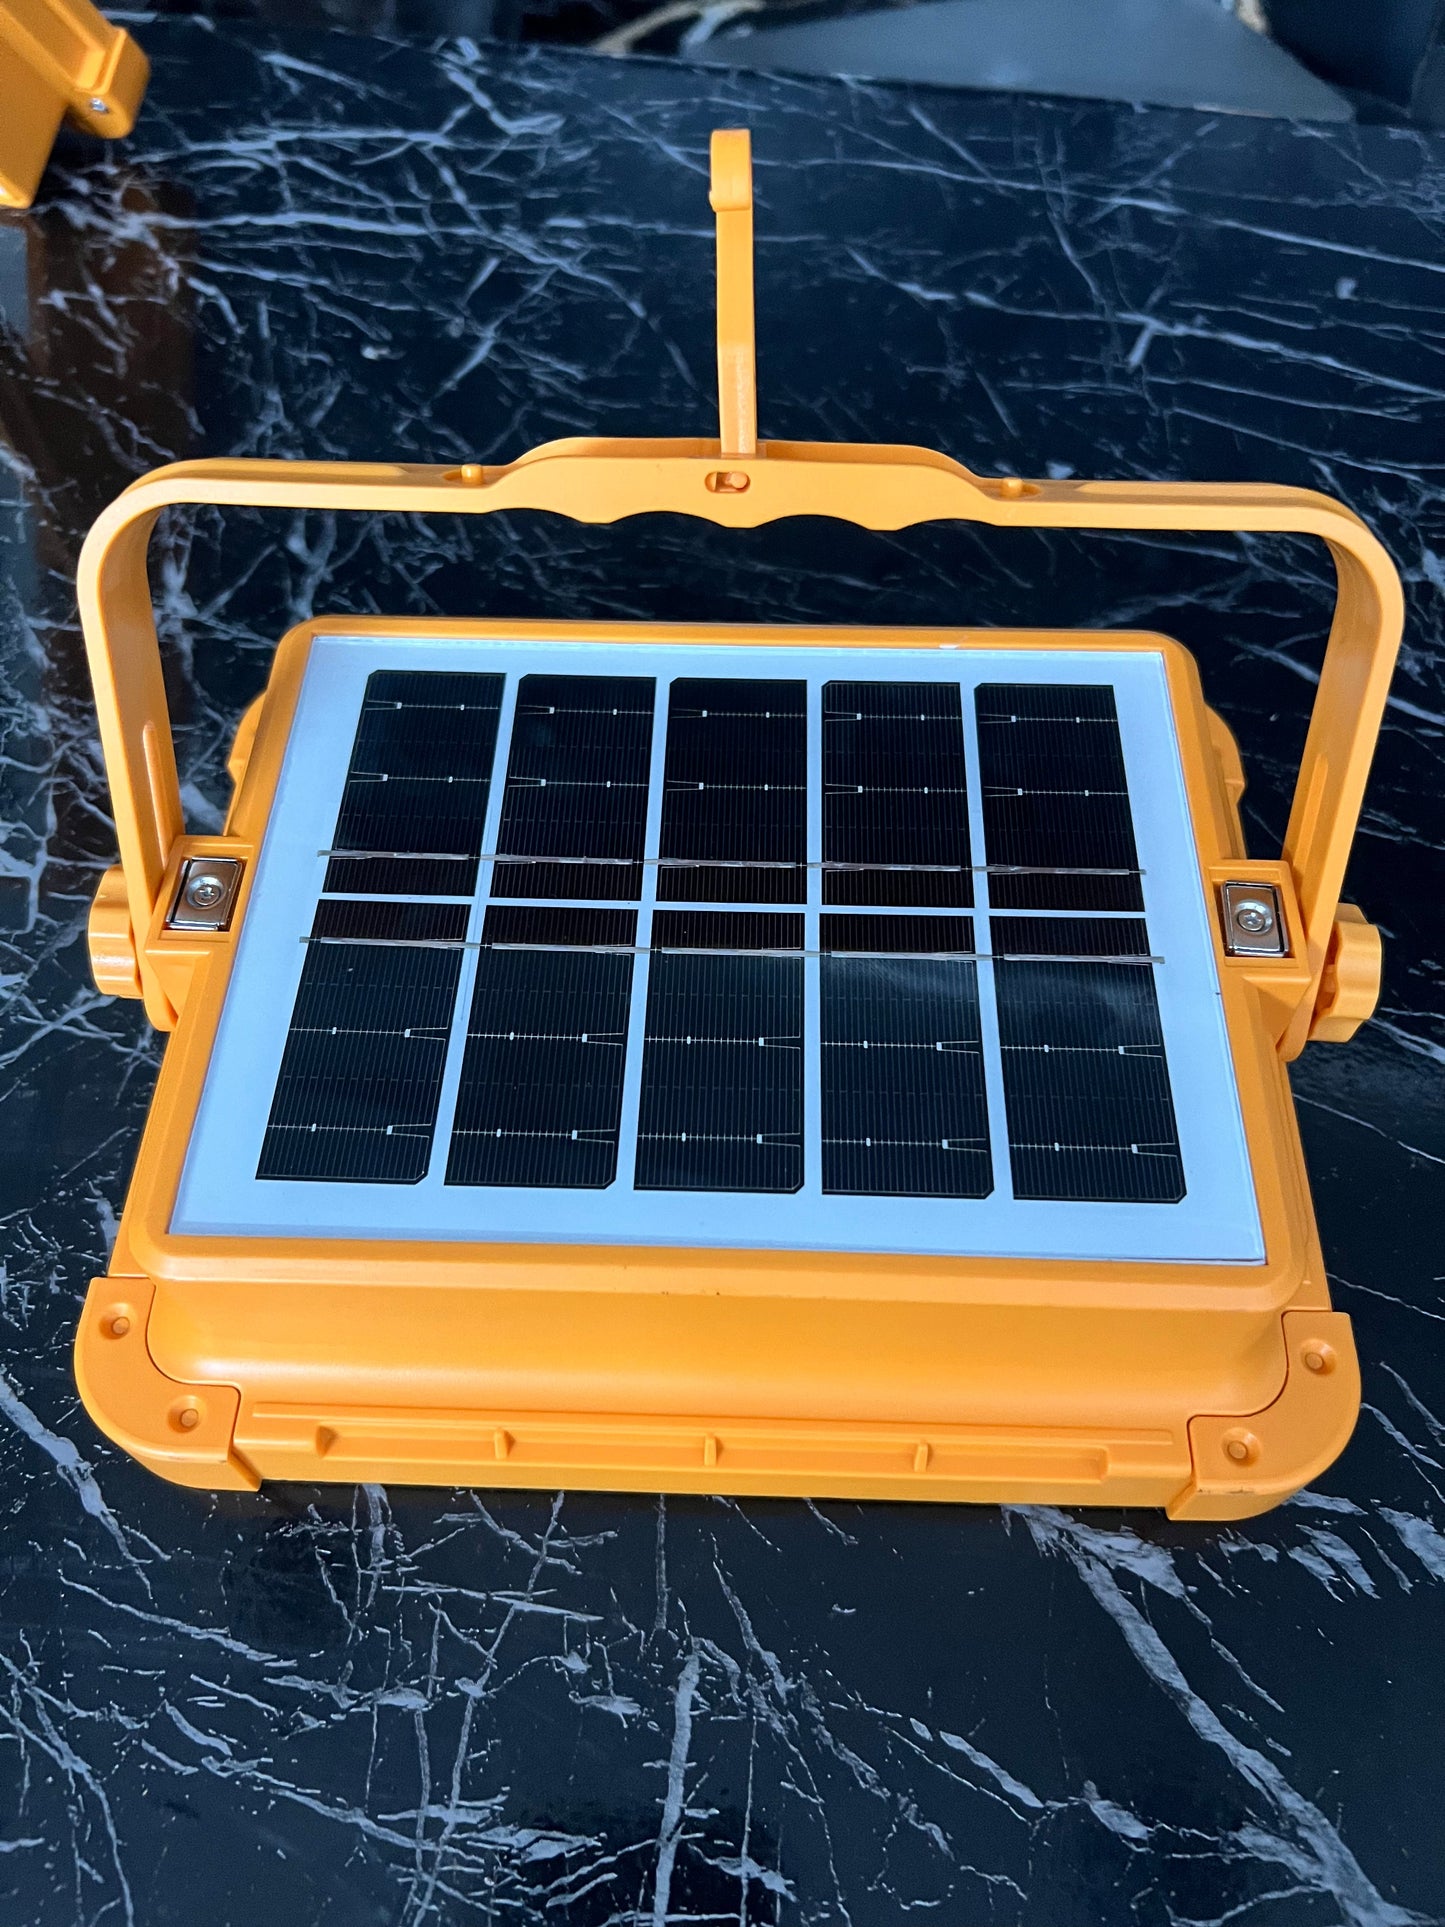 MKY Solar Flood Lights 5 in 1 Modes White / Warm White / Natural White / Dim White / Red-Blue Flash 8 hours backup Waterproof ip66